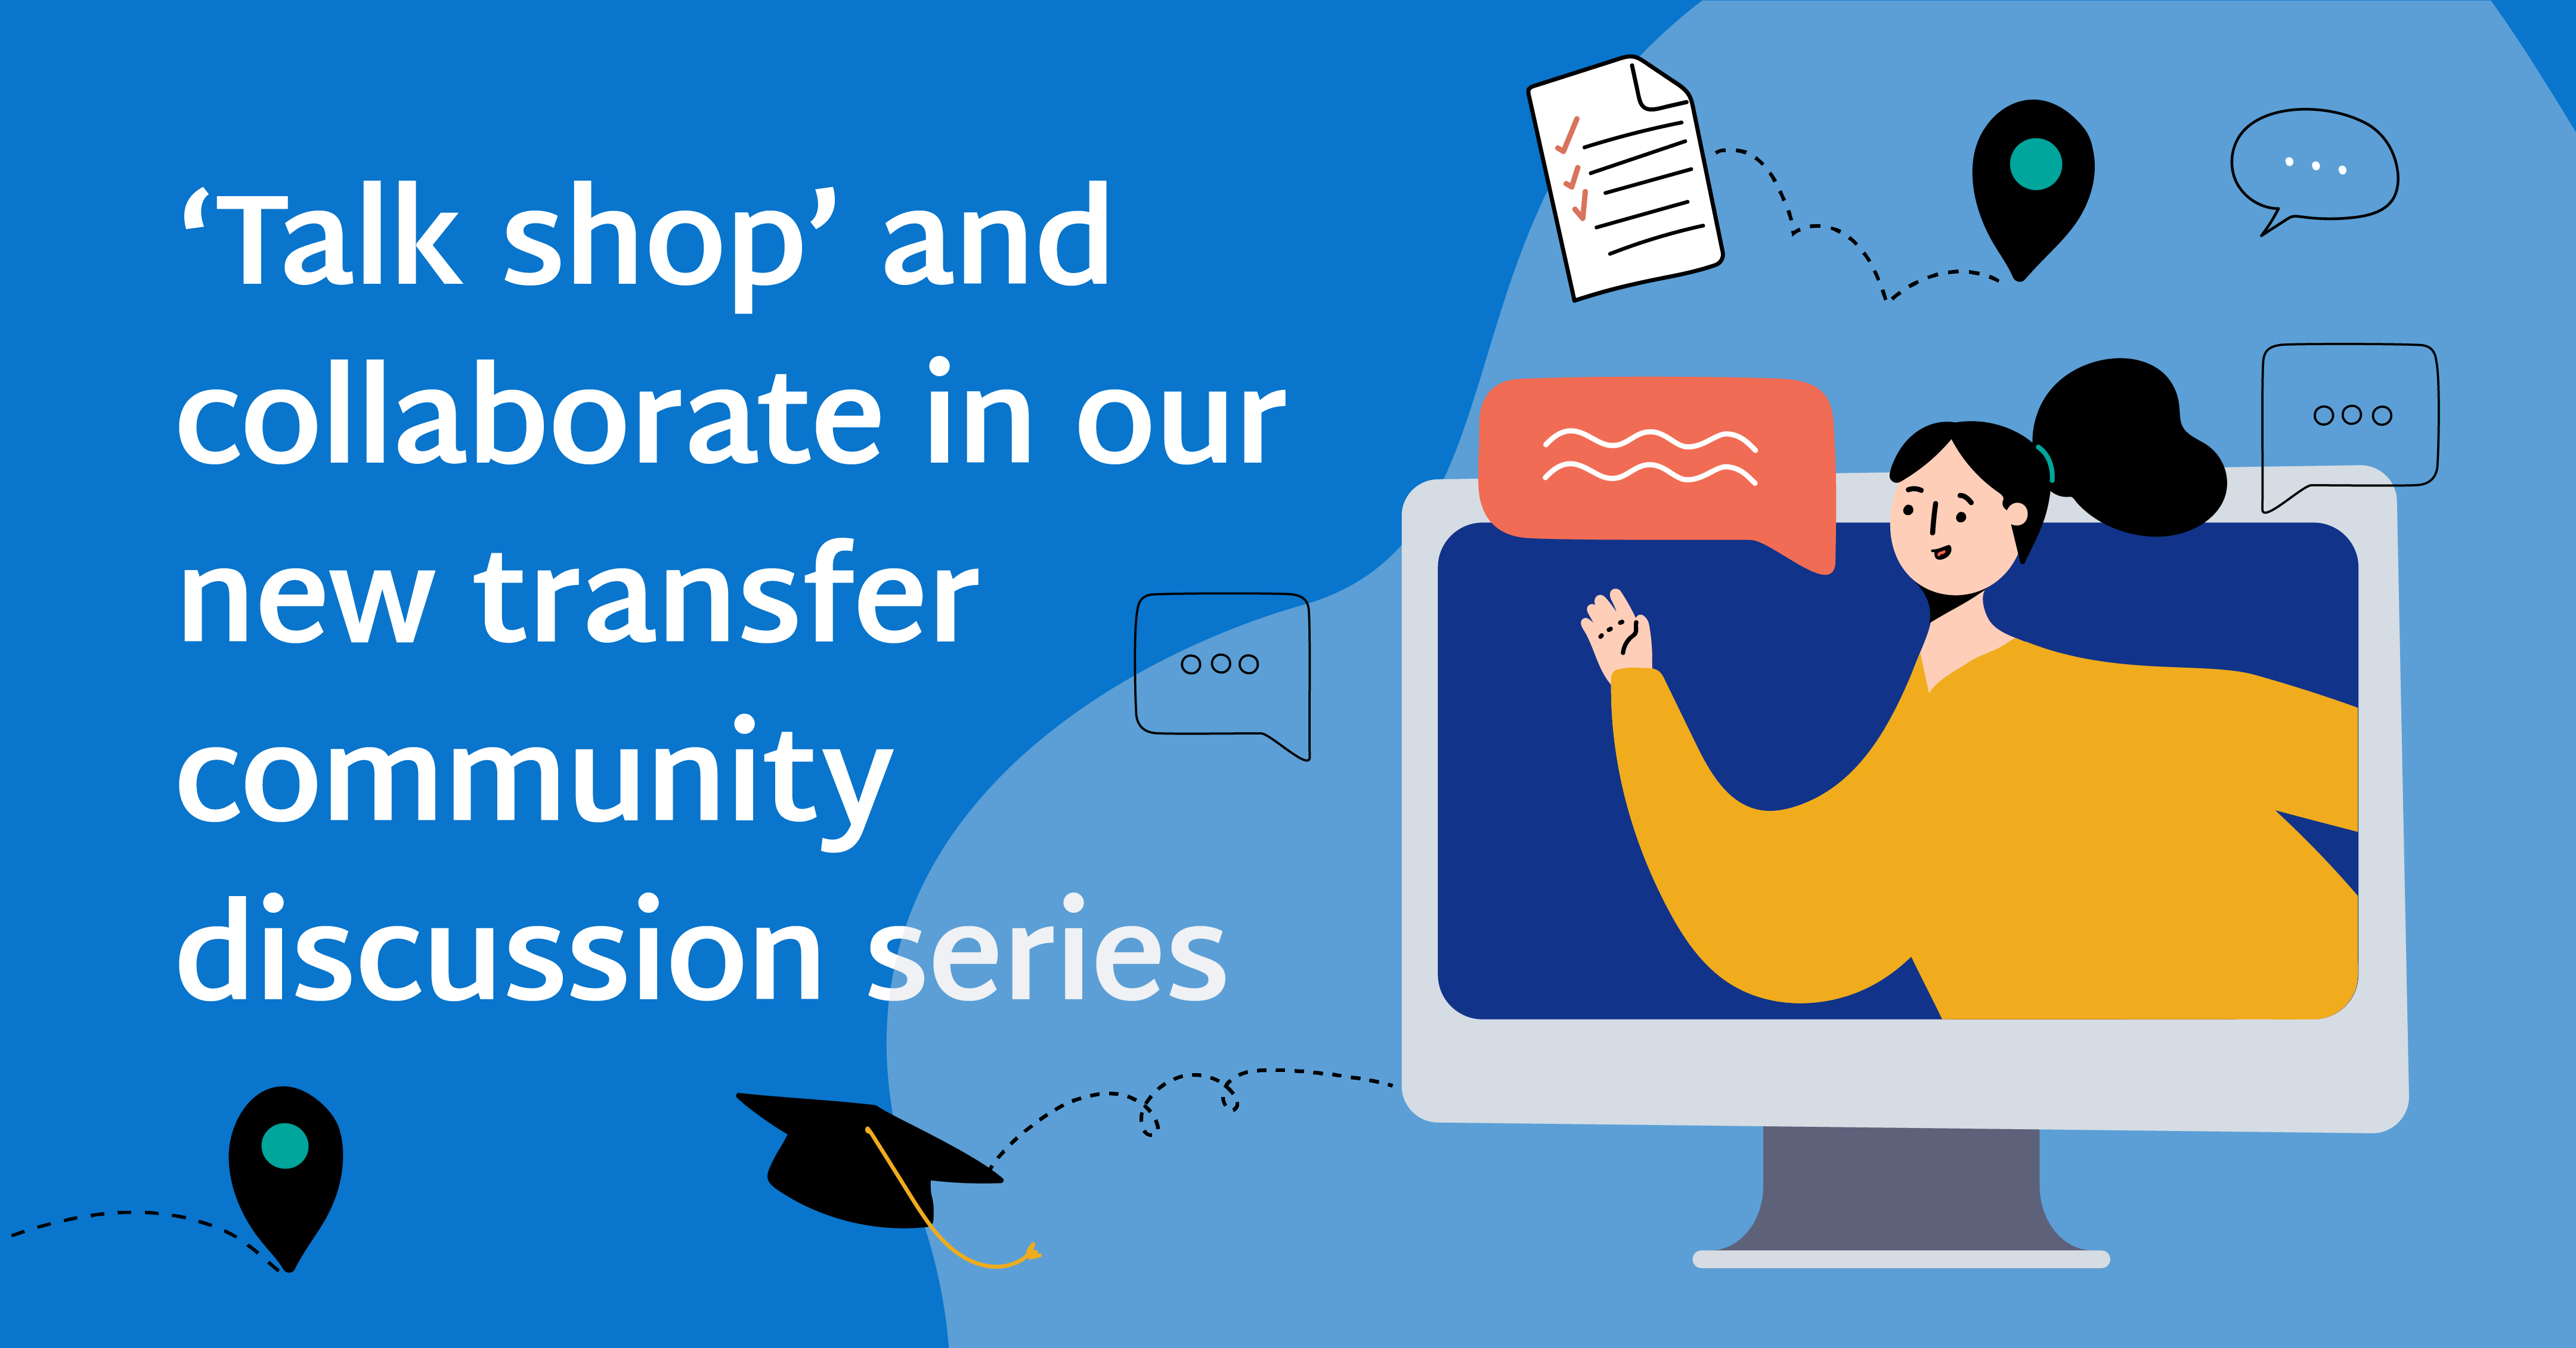 talk-shop-in-new-transfer-community-discussion-series